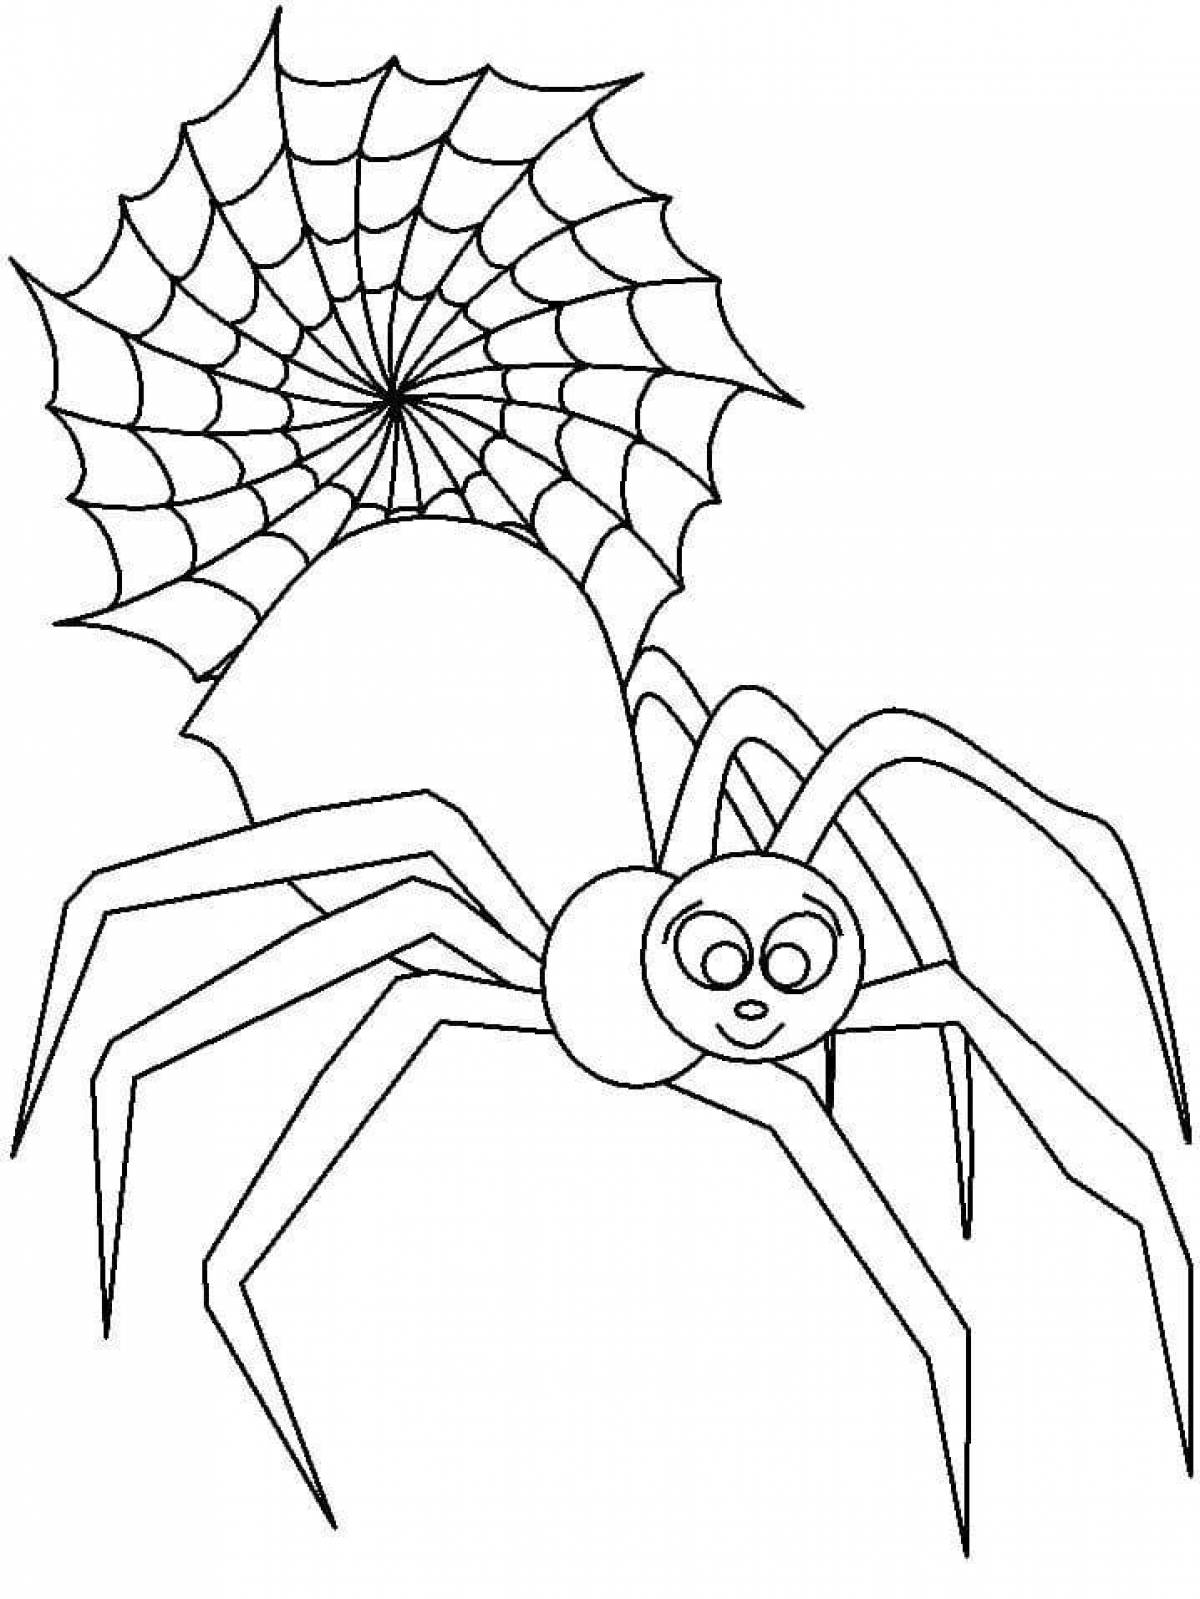 Playful spider coloring page for kids